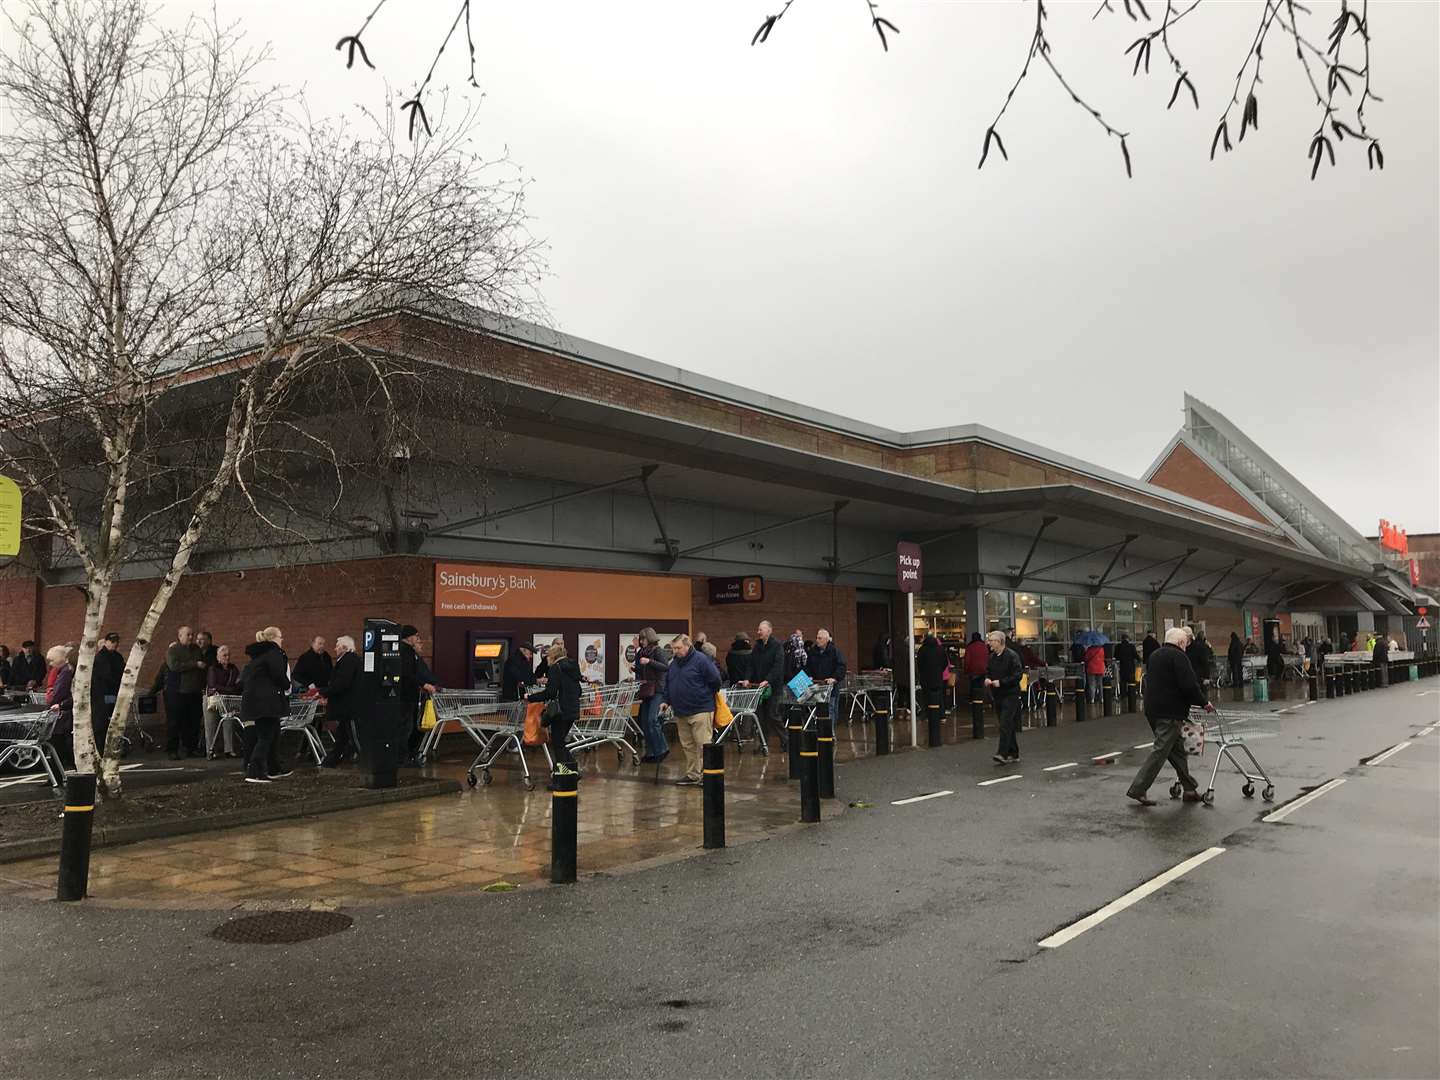 The queue at Sainsbury's in Sittingbourne as the elderly arrived for an allocated hour